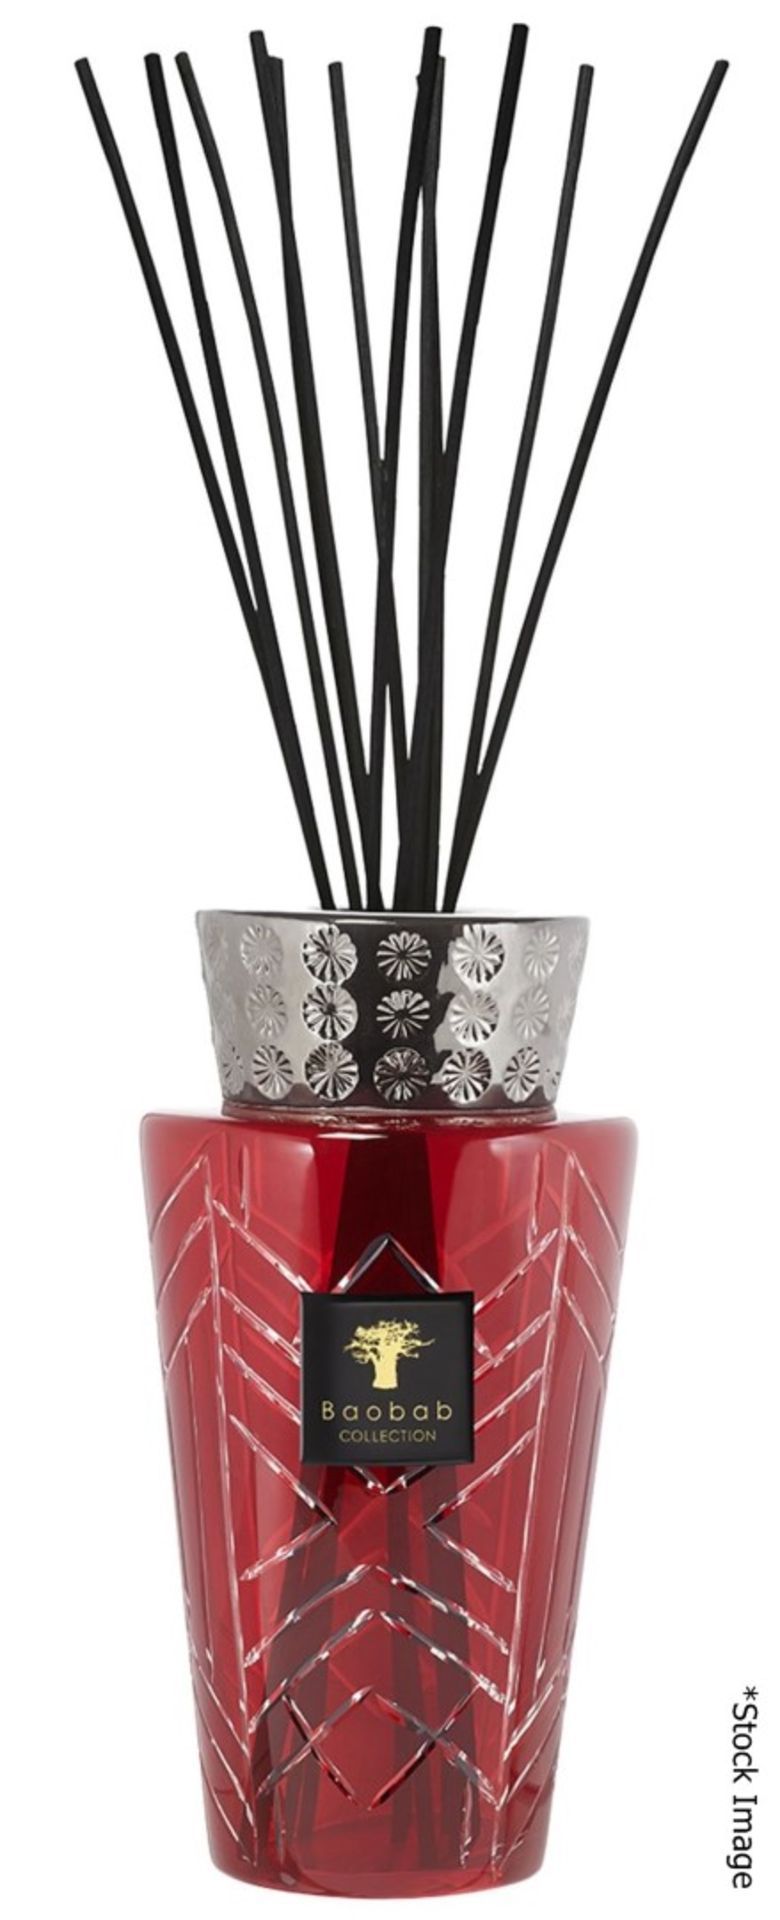 1 x BAOBAB COLLECTION 'Louise High Society' 5-Litre Totem Diffuser Vase - Original Price £745.00